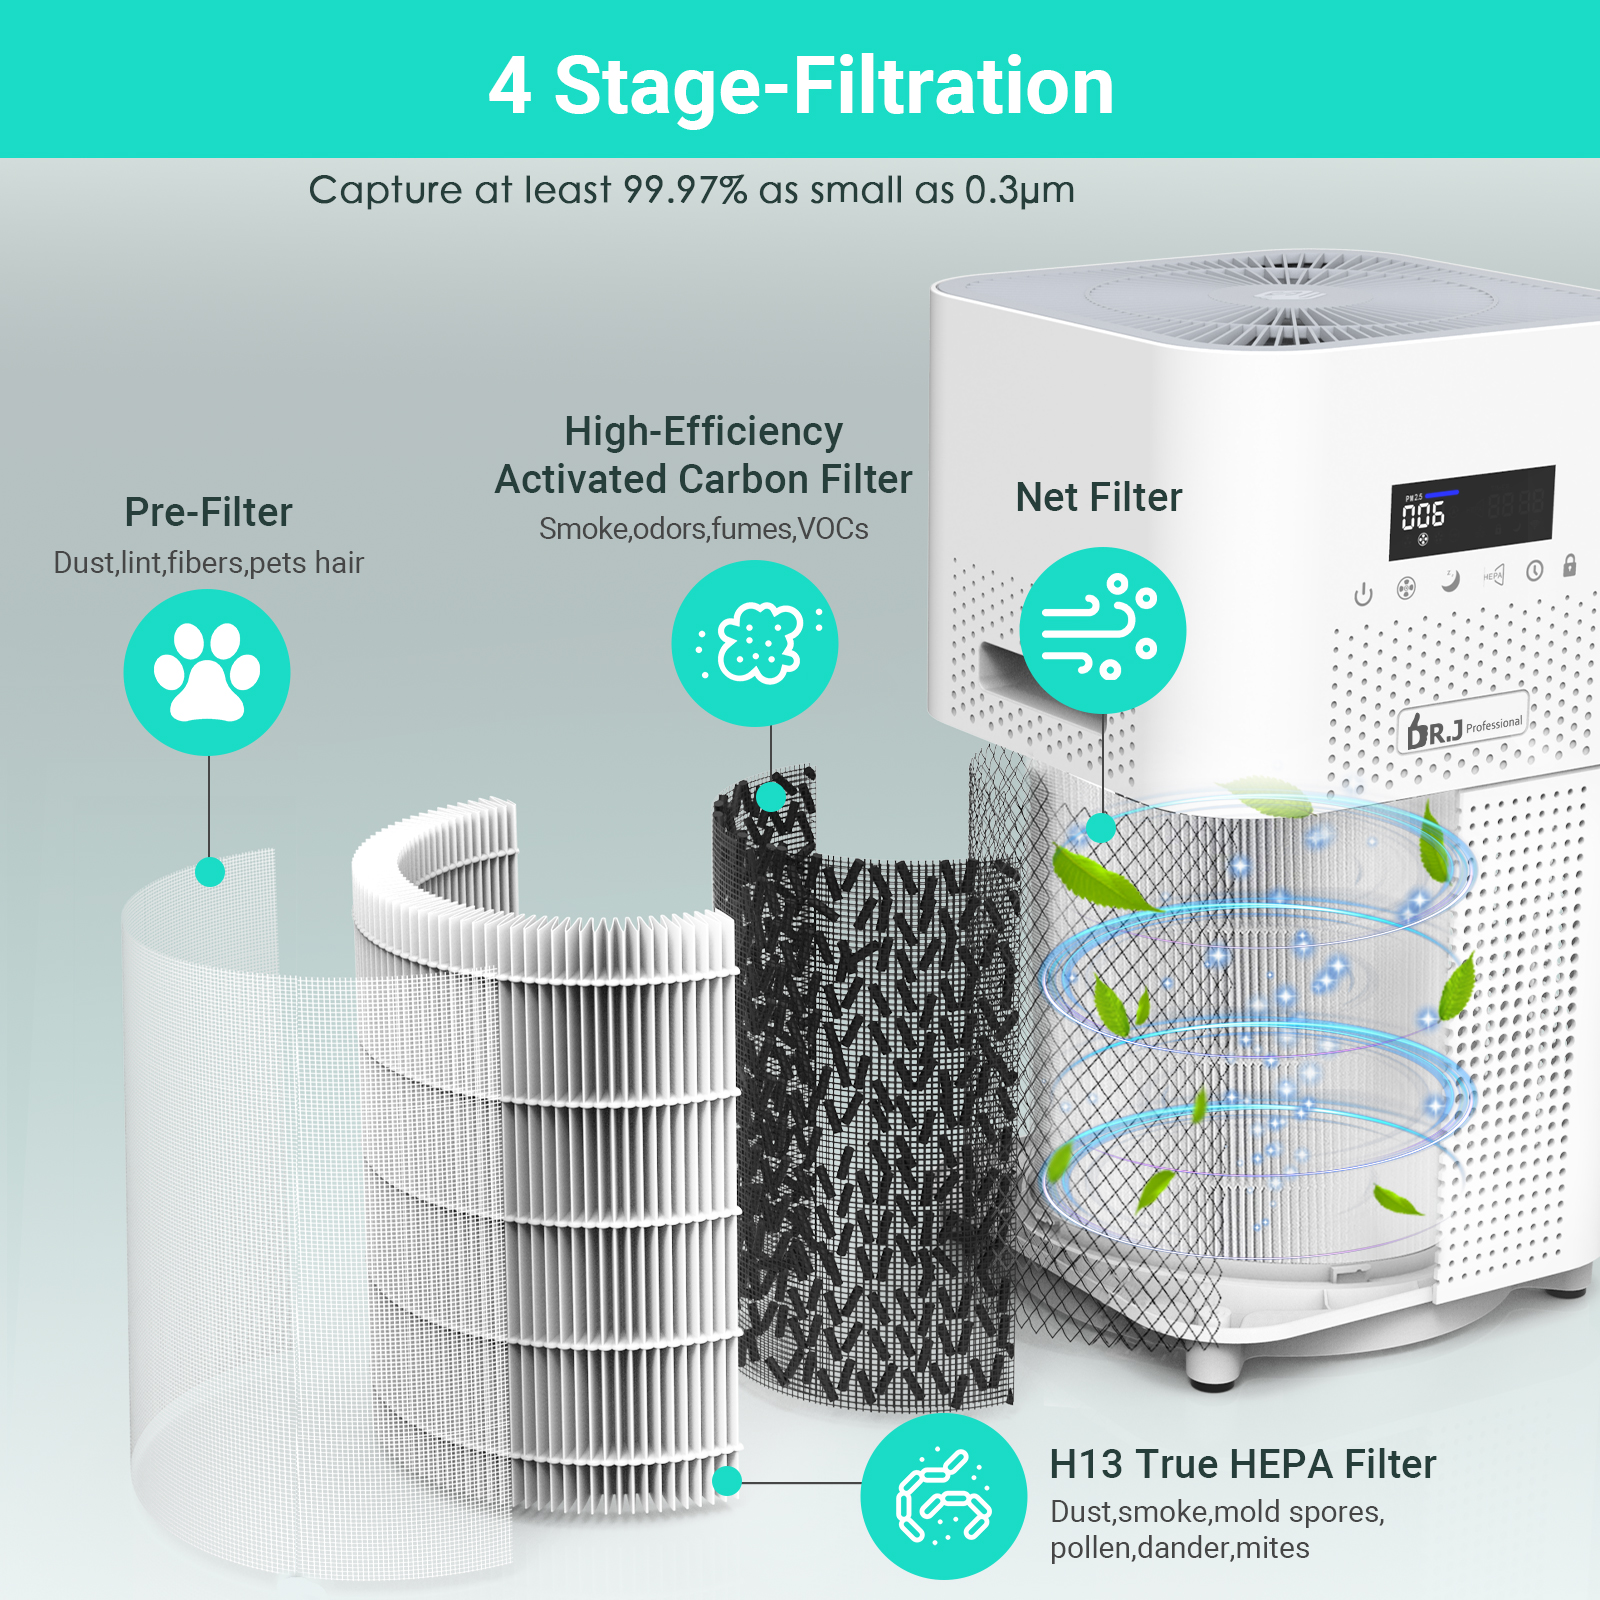 DR.J Professional Air Purifier for Home Large Room, 1800 sq. ft, H13 True HEPA Filter, 4-Stage Auto Mode 12H Timer - image 8 of 10